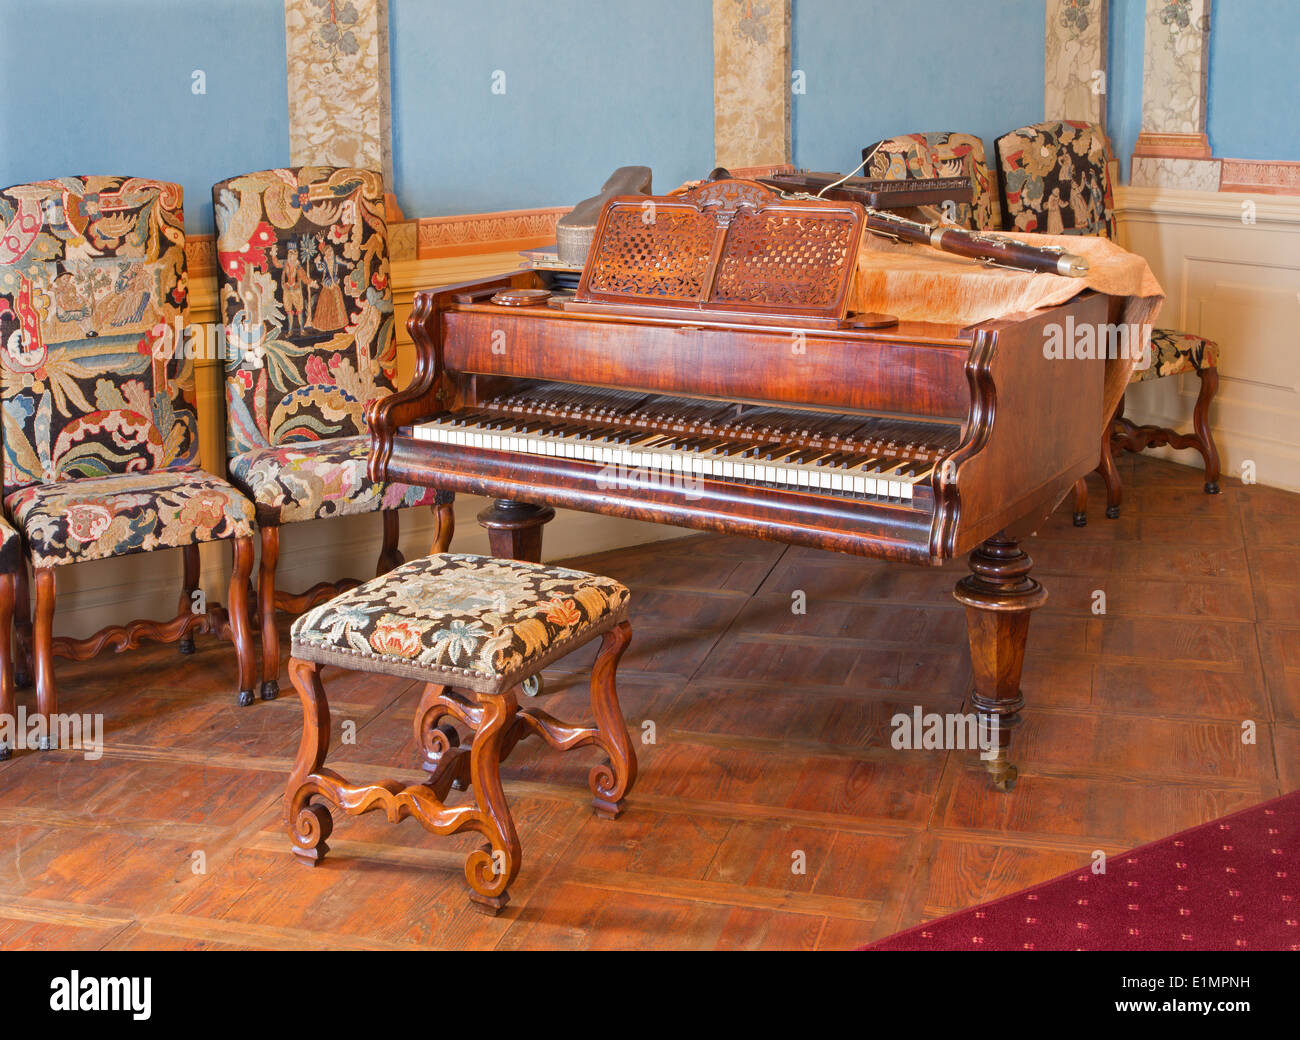 Piano in music saloon in palace Saint Anton with the handmade needlework on  the chairs from 19. cent Stock Photo - Alamy